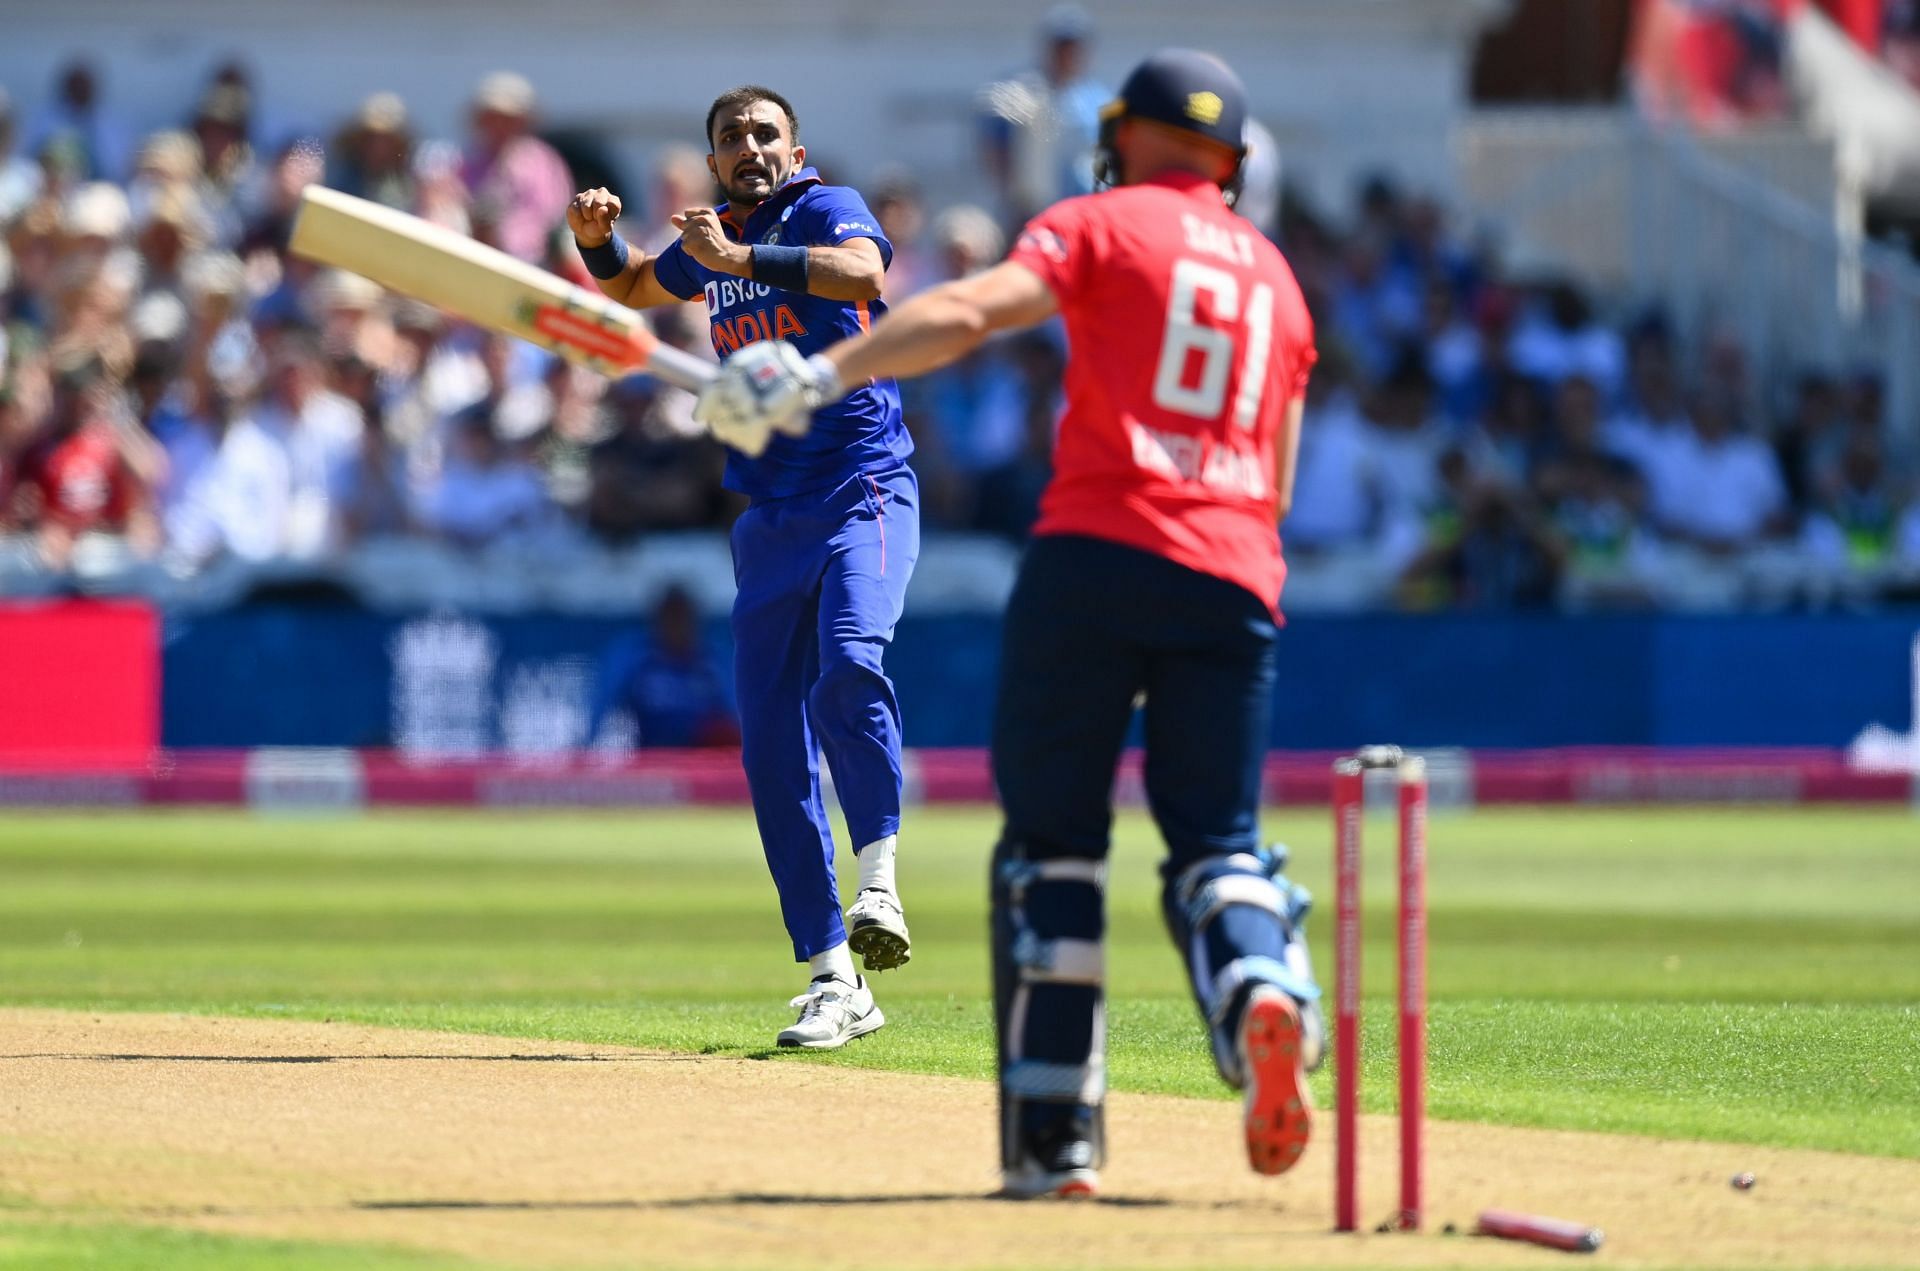 Harshal Patel offers plenty of variety in the middle overs